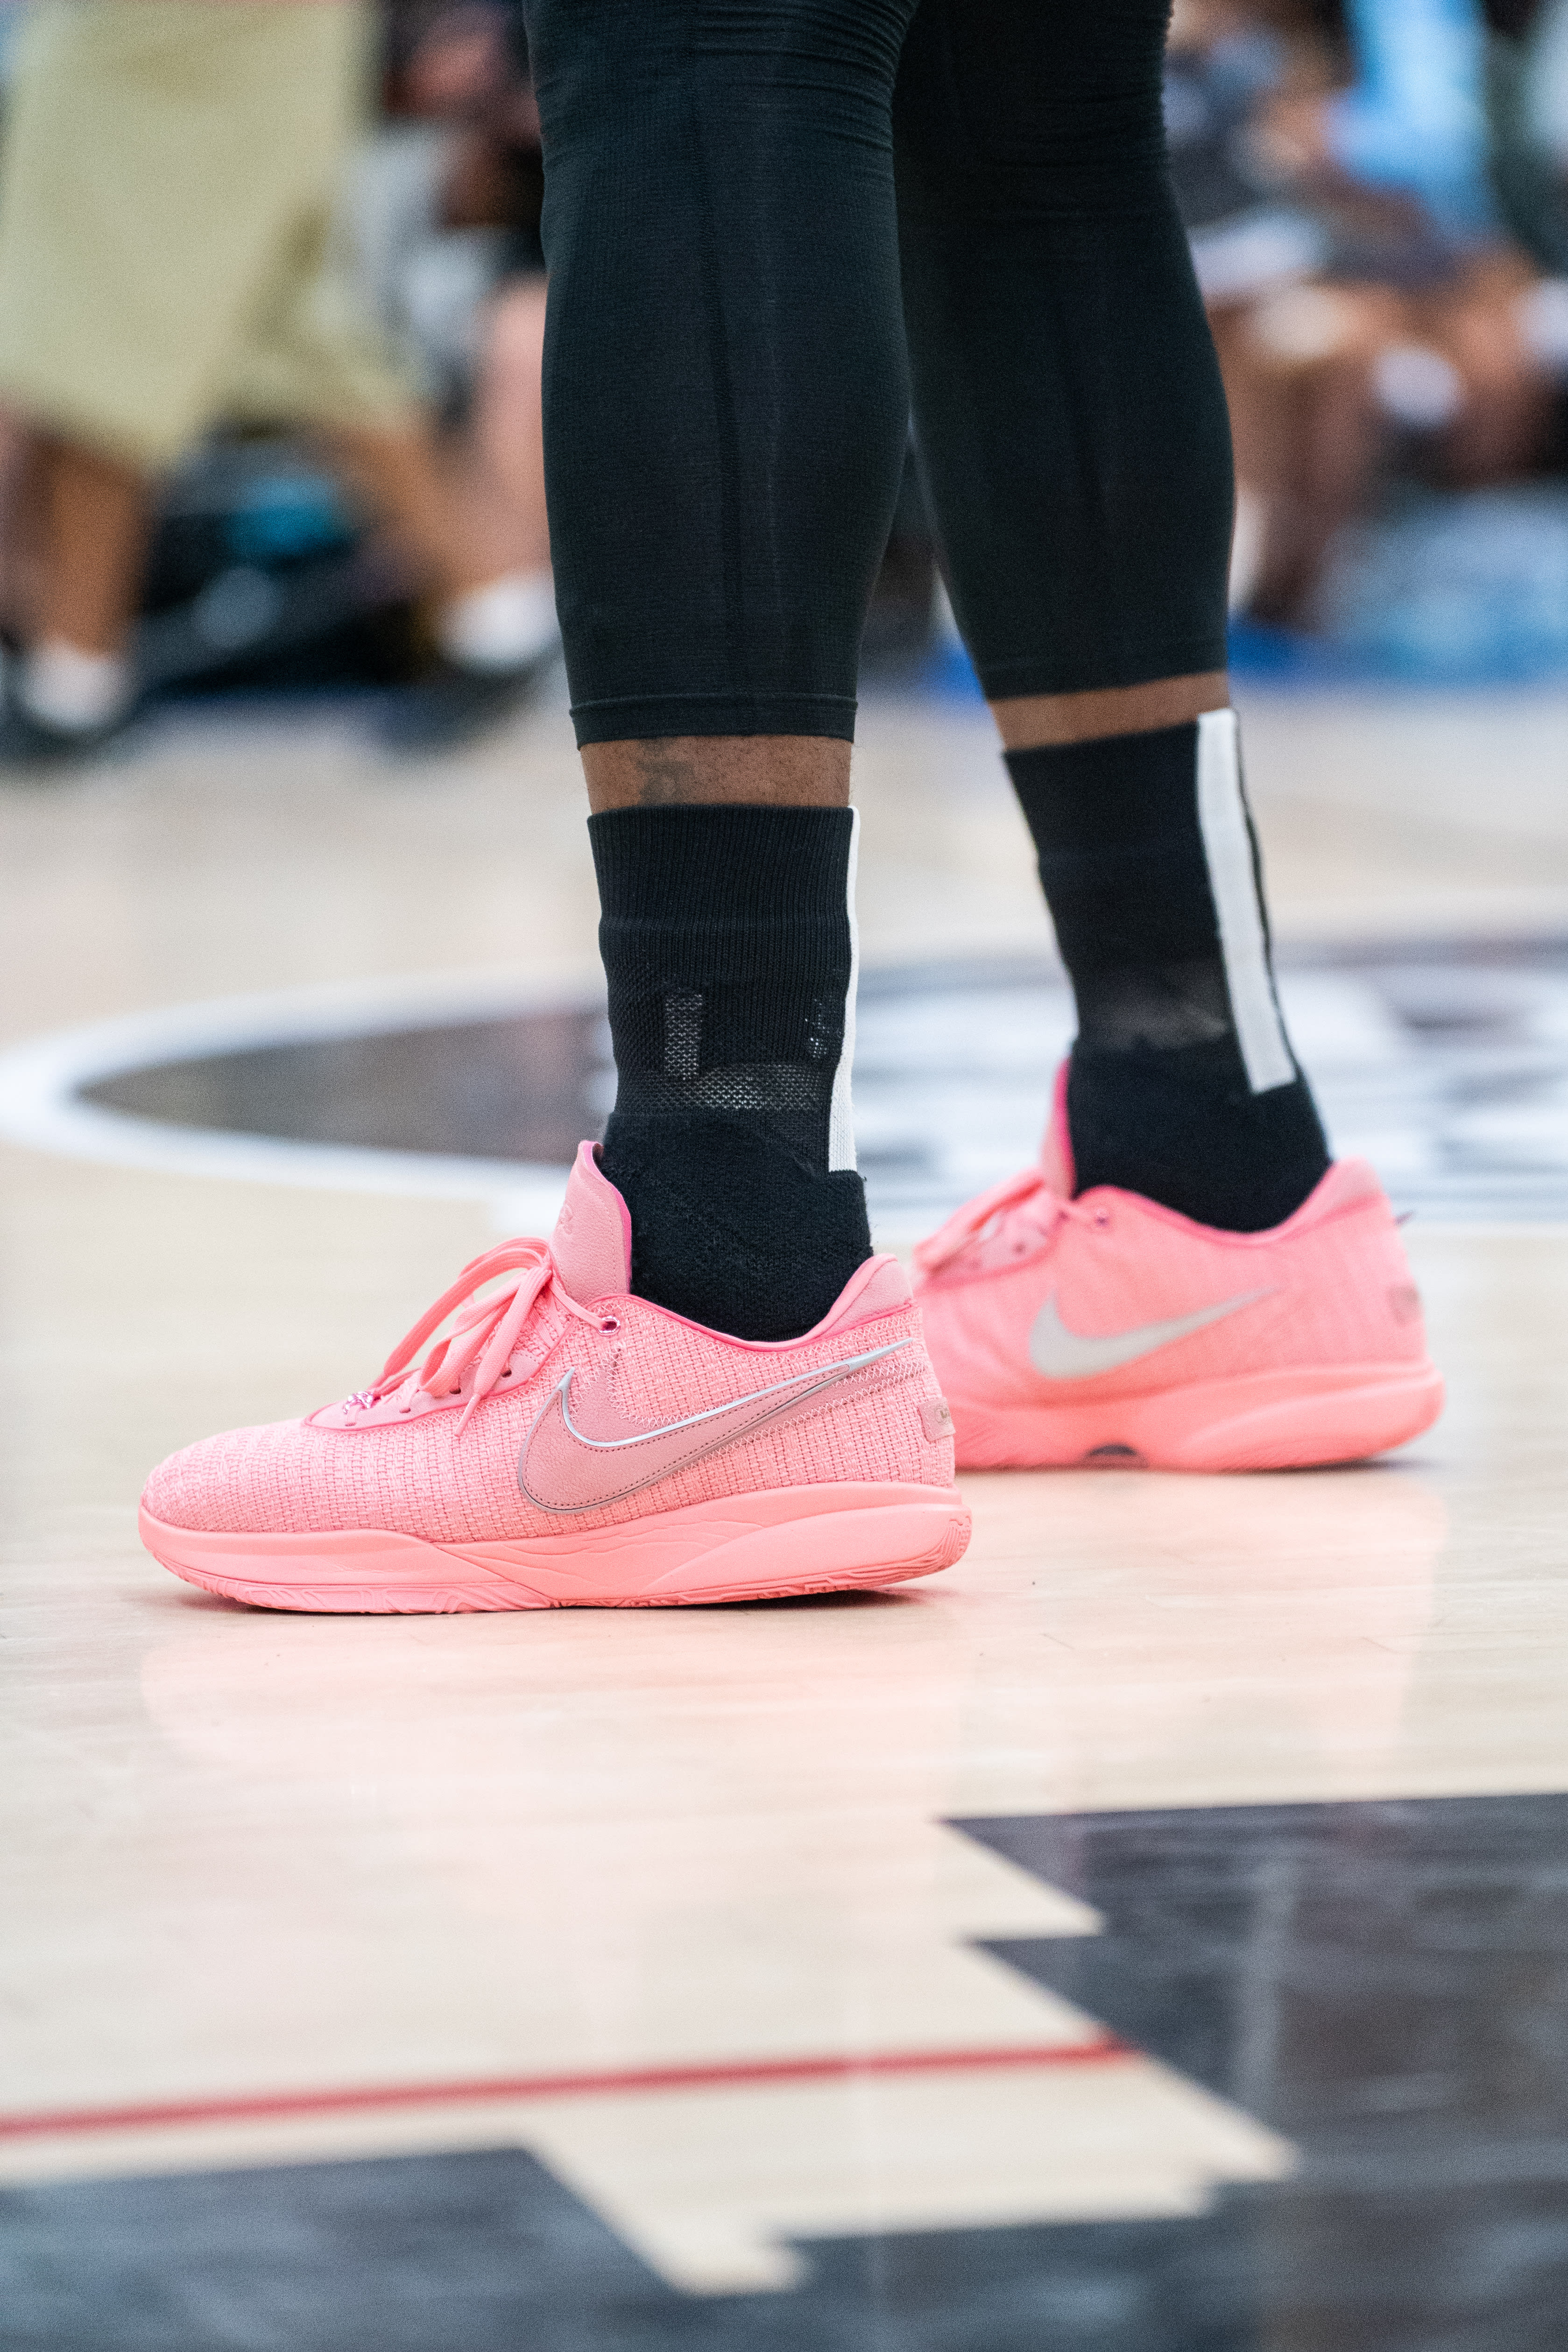 LeBron James wearing the Nike LeBron 20 Pink in Drew League on July 16, 2022